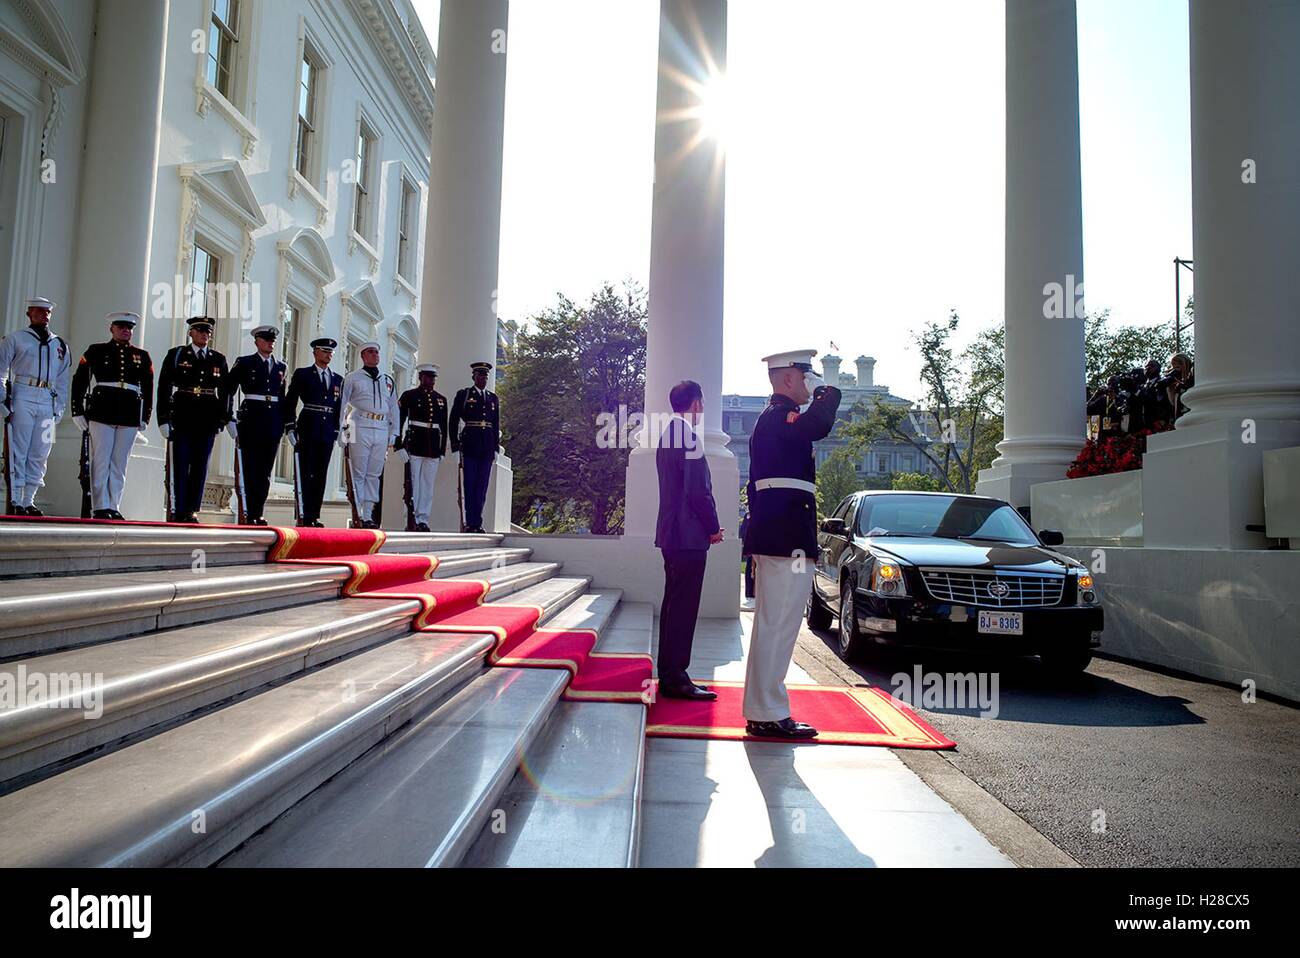 U.S. Chief of Protocol Ambassador Peter Selfridge waits to greet a leader arriving for the U.S.-Africa Leaders Summit Dinner at the North Portico of the White House August 5, 2014 in Washington, DC. Stock Photo